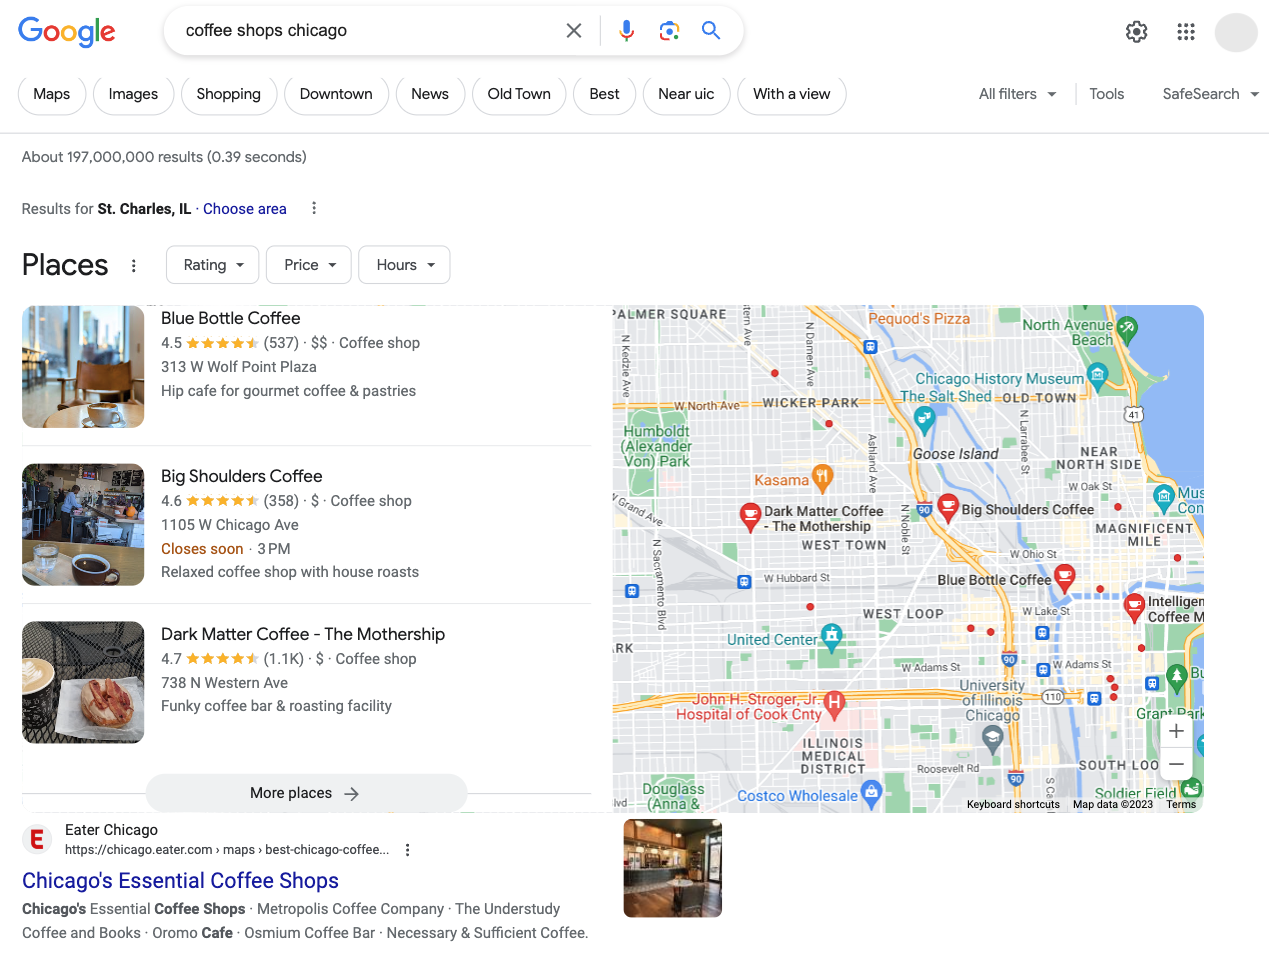 Google local search result for "coffee shops chicago"